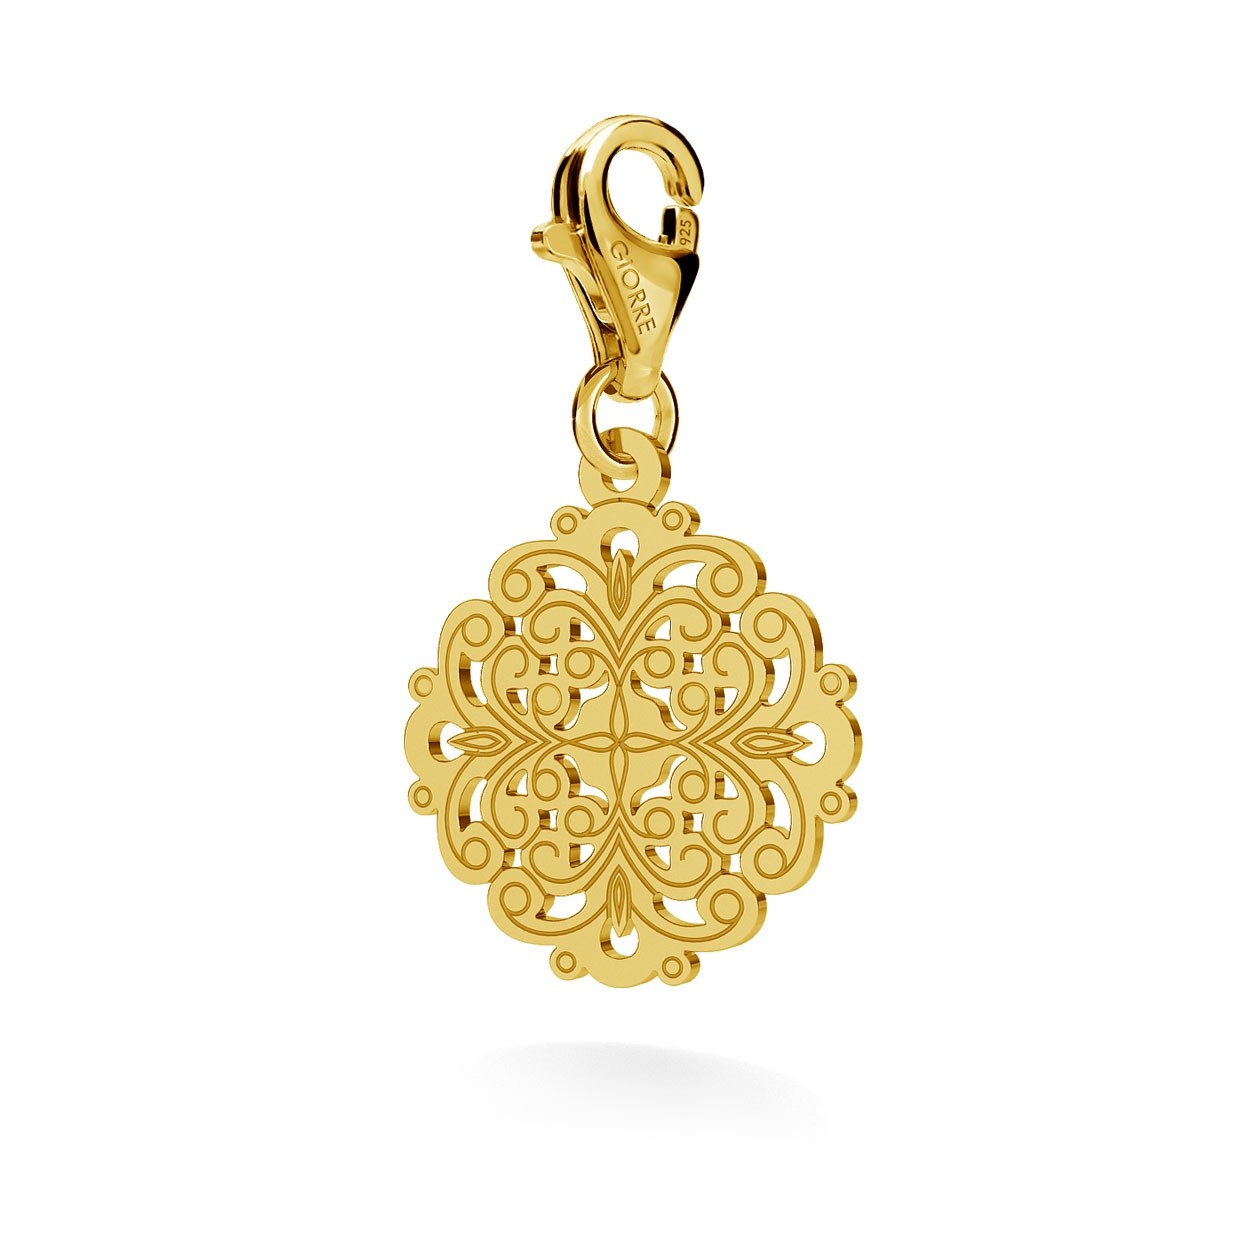 CHARM 106, GOTIC PENDANT, STERLING SILVER (925) RHODIUM OR GOLD PLATED